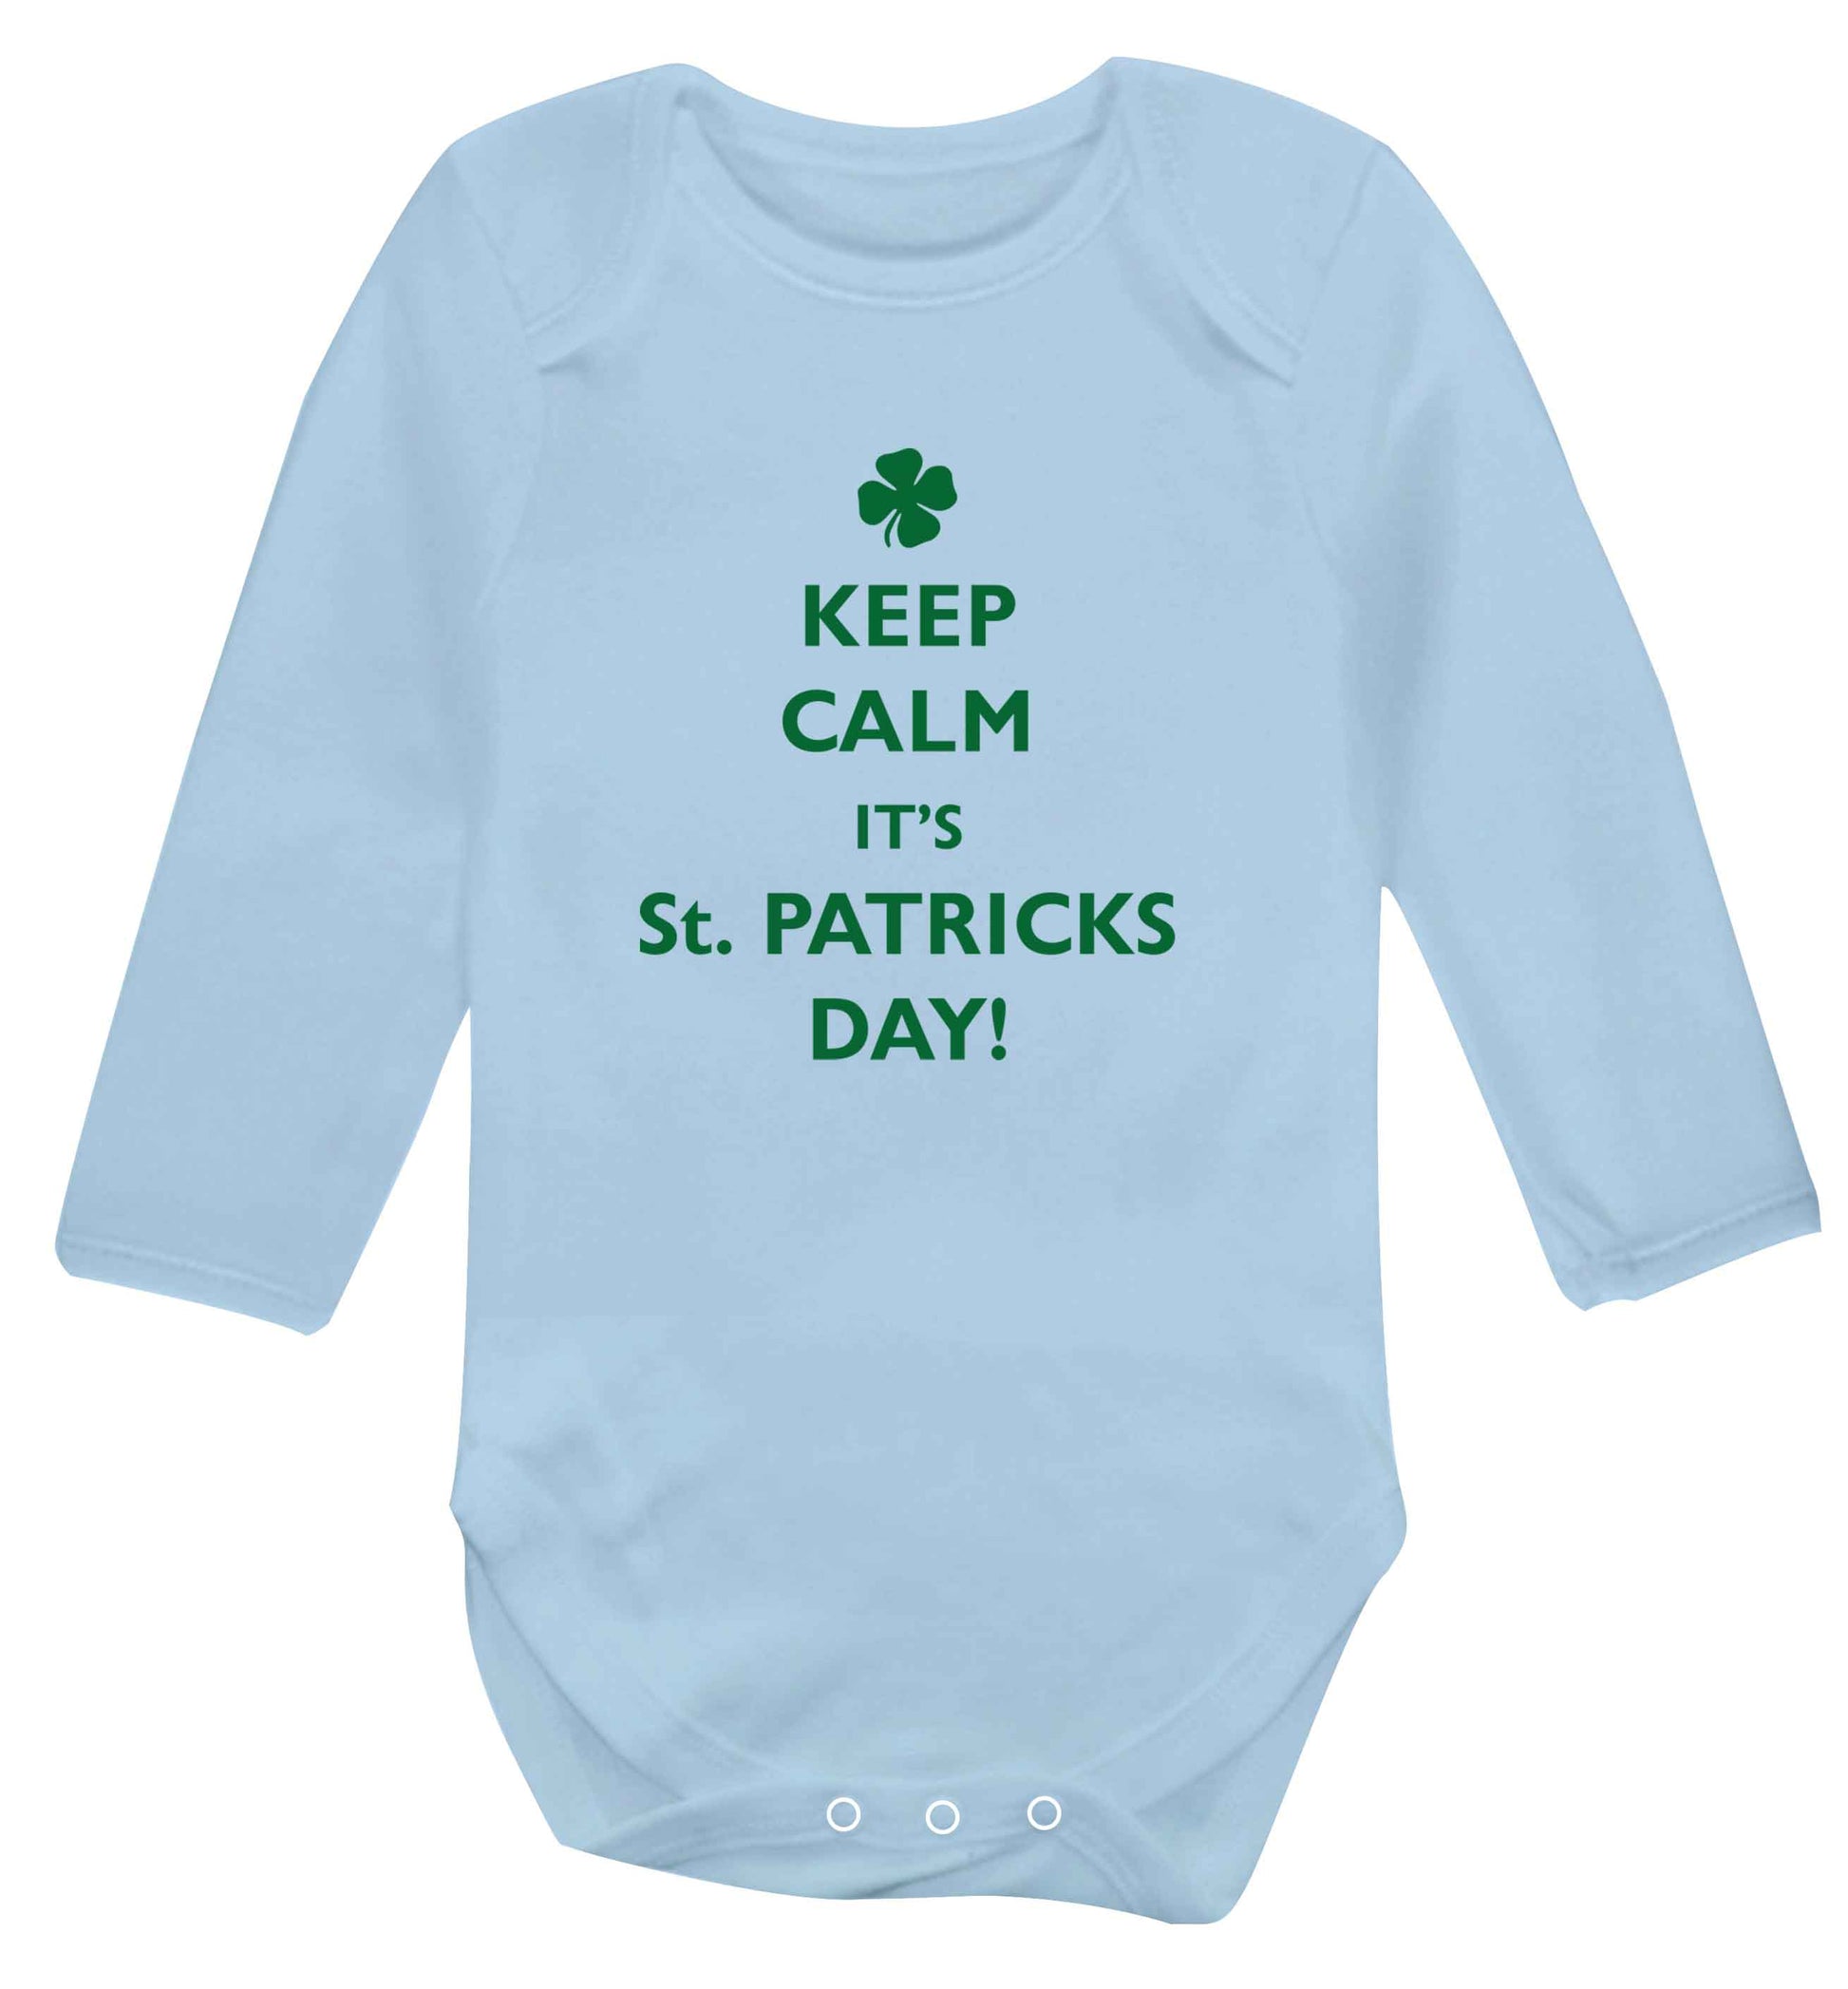 I can't keep calm it's St.Patricks day baby vest long sleeved pale blue 6-12 months